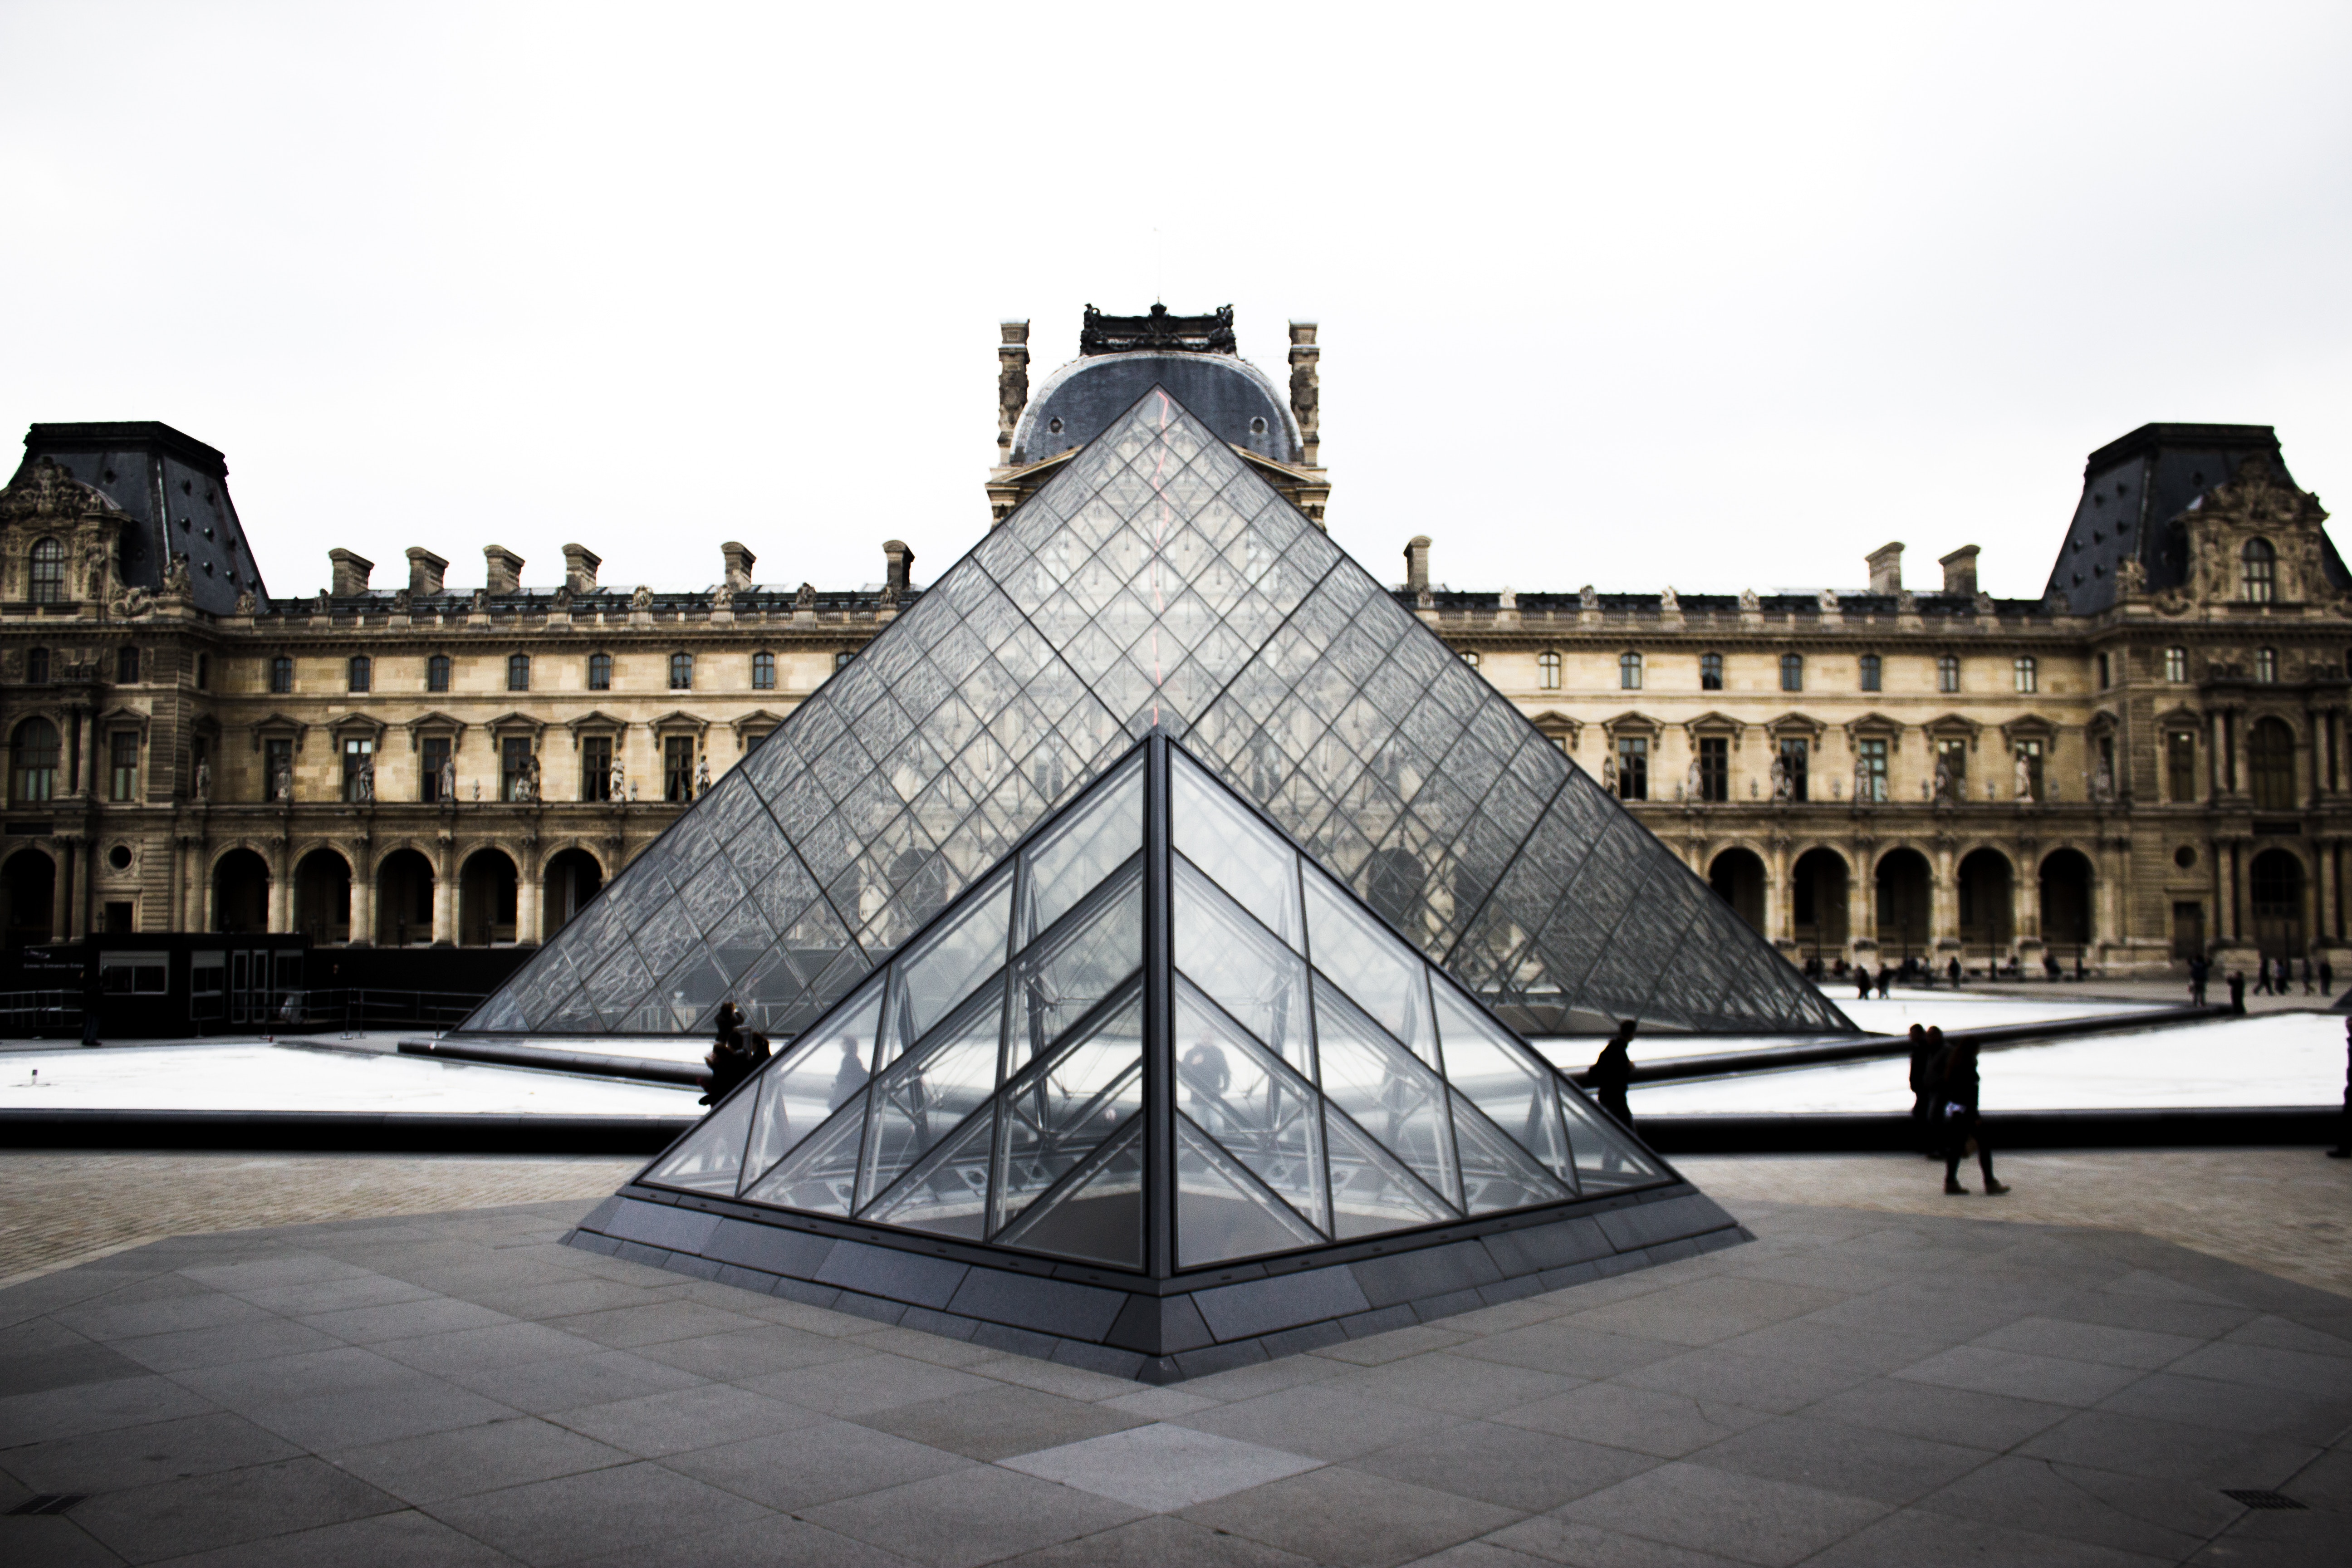 Louvre Museum Endowment Fund to Help Restore France's Historica Buildings